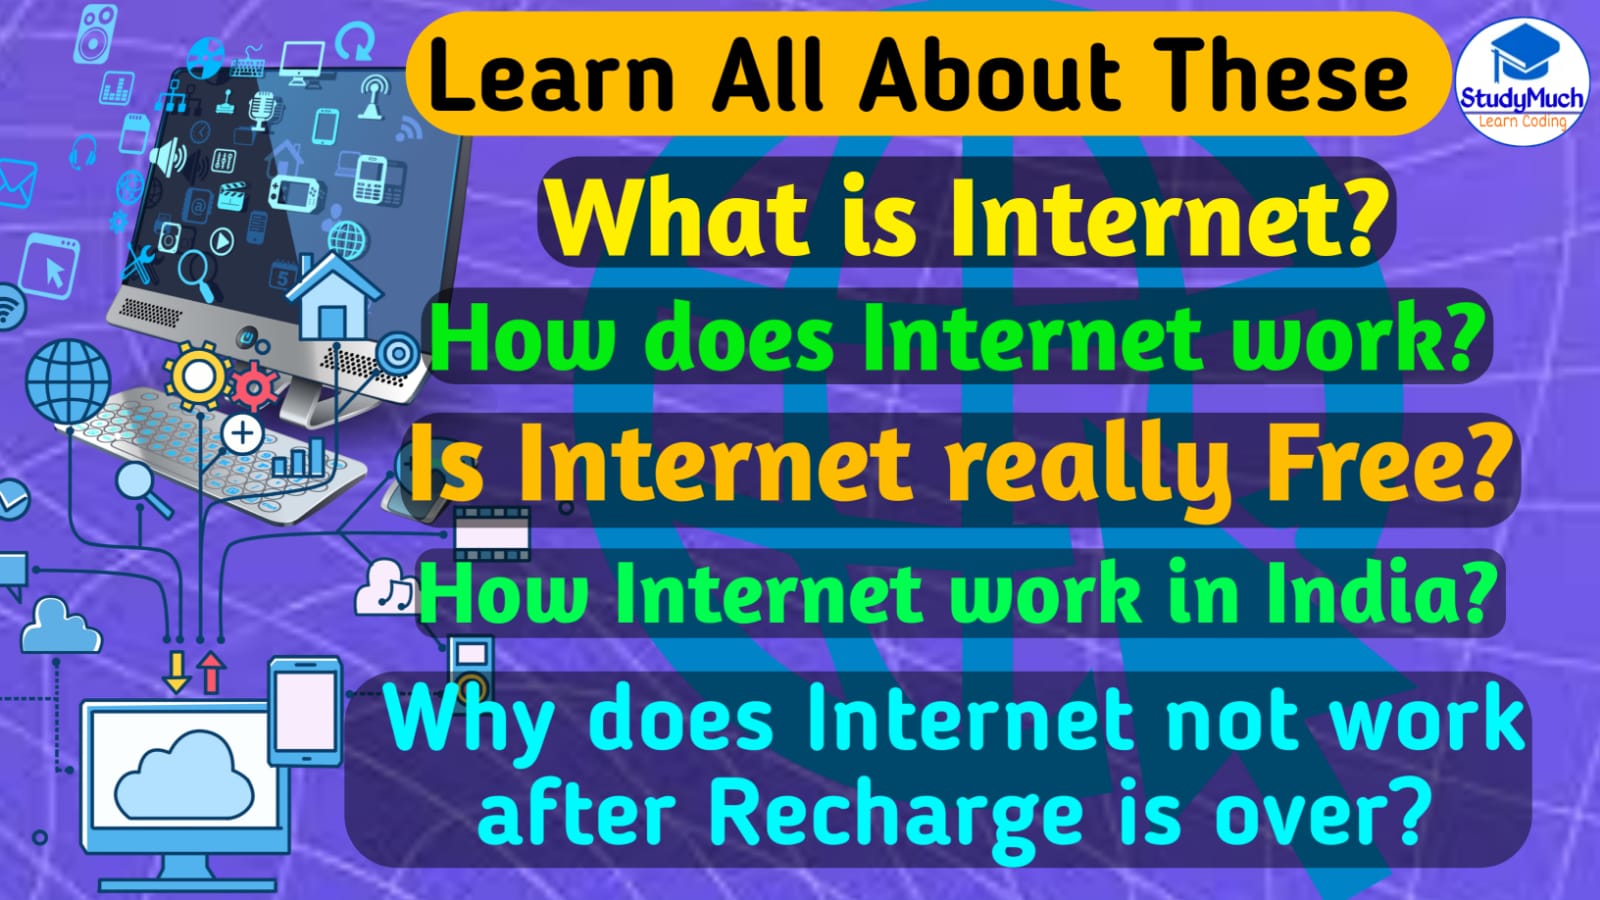 What is Internet? Is it really Free?